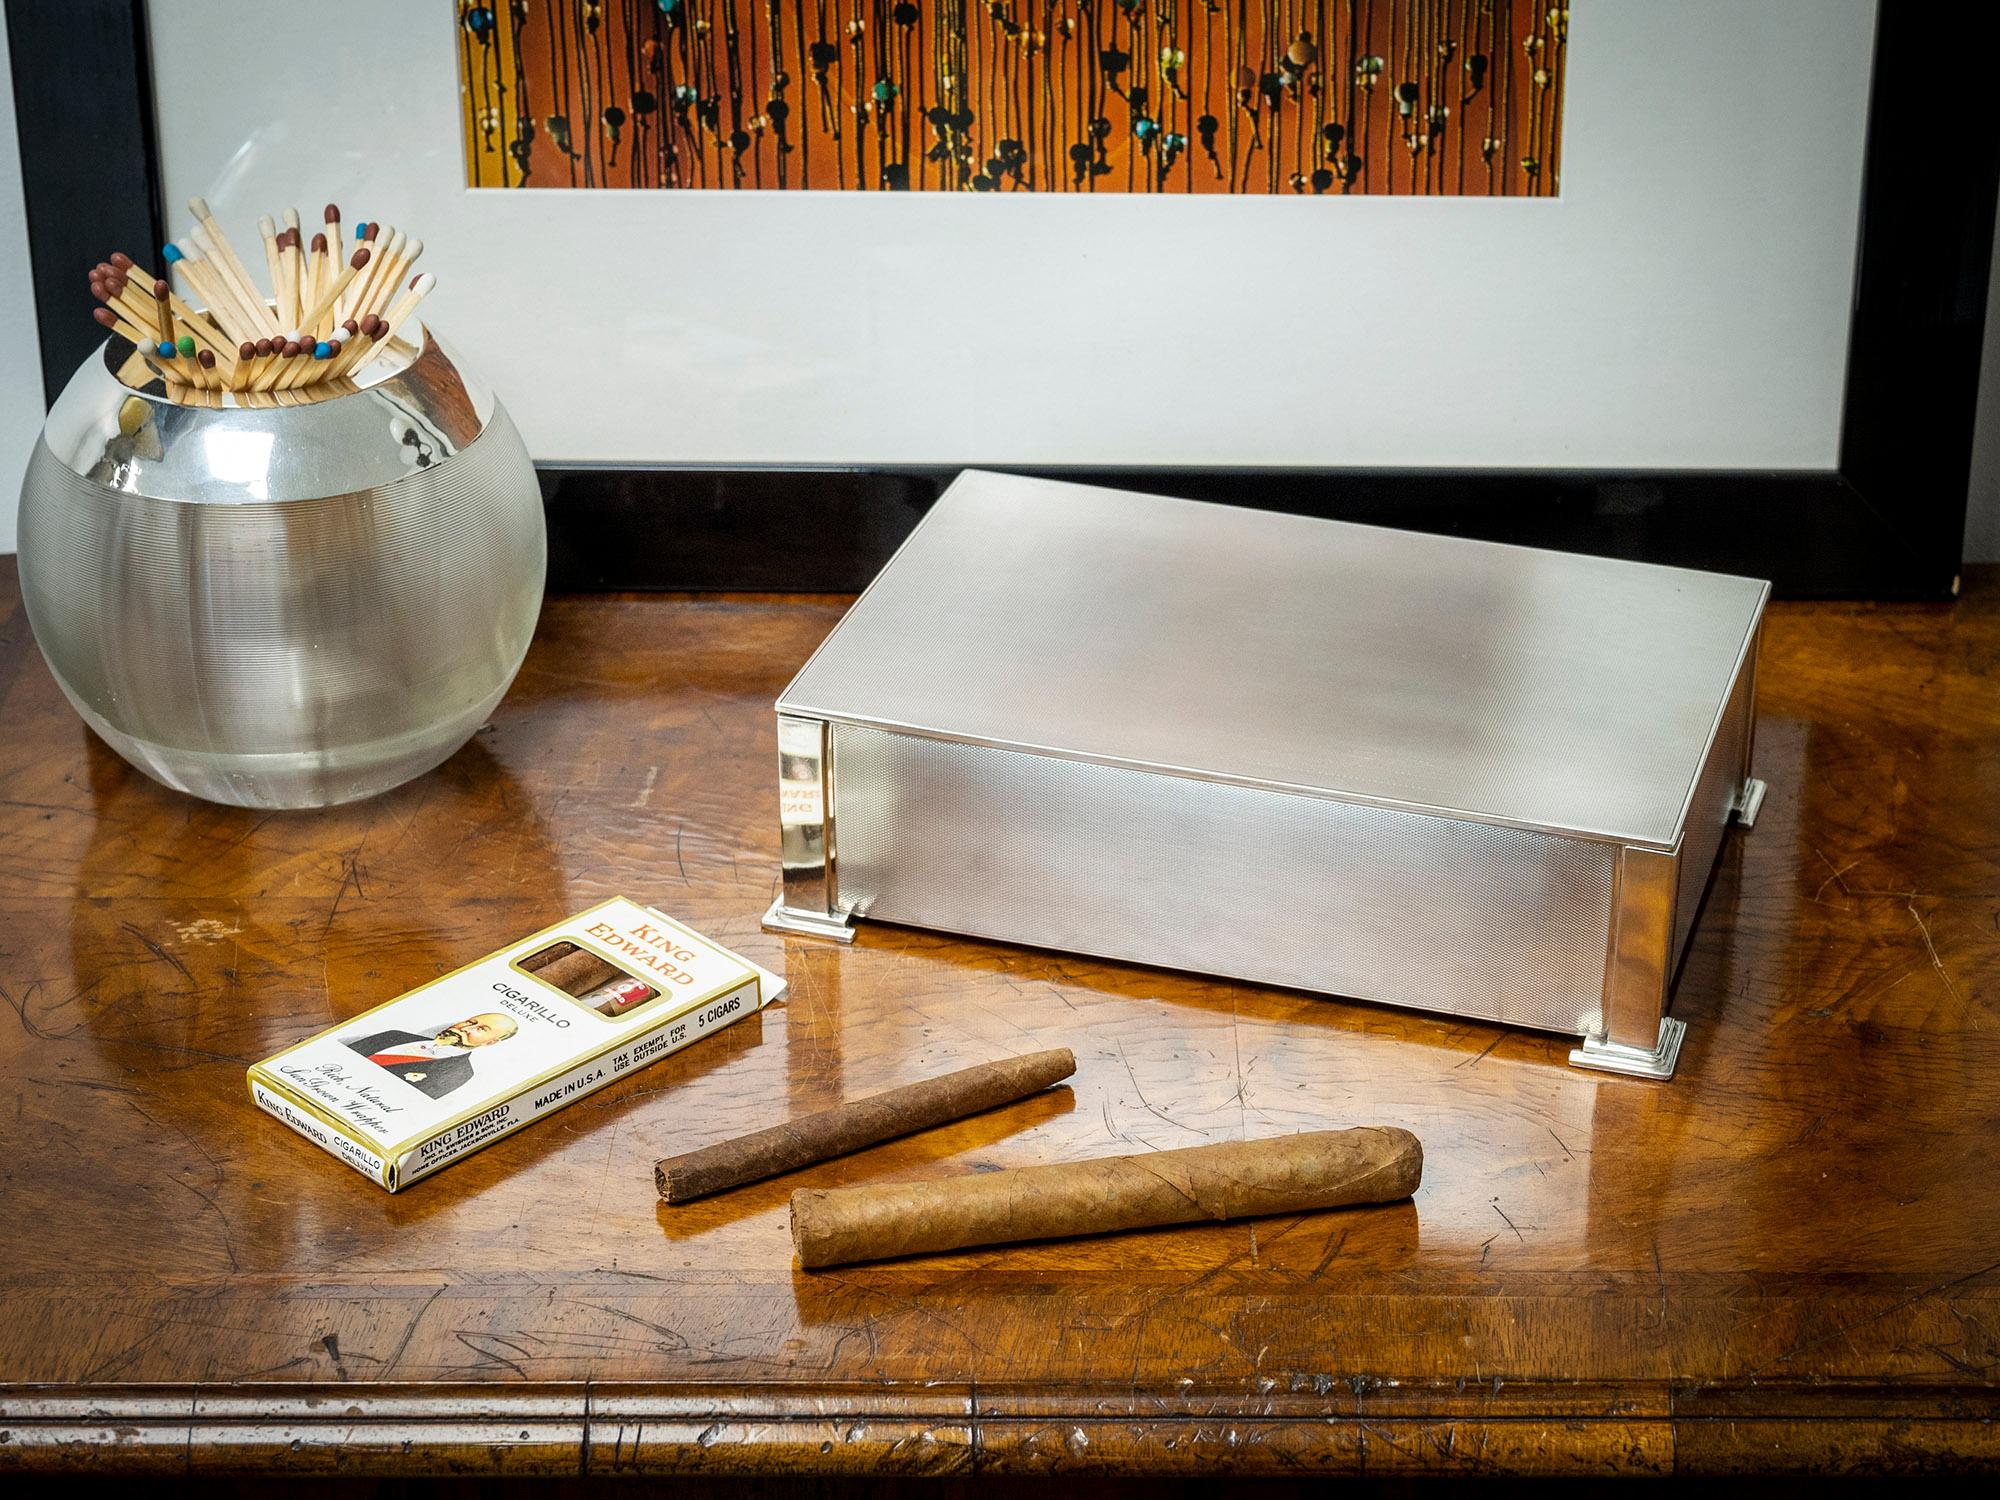 With a Cedar Wood Lining

From our Silver collection, we are pleased to offer this Art Deco Sterling Silver Cigar Box. The Cigar Box of rectangular shape crafted from Sterling Silver features engine turned panels with strut columns to each corner